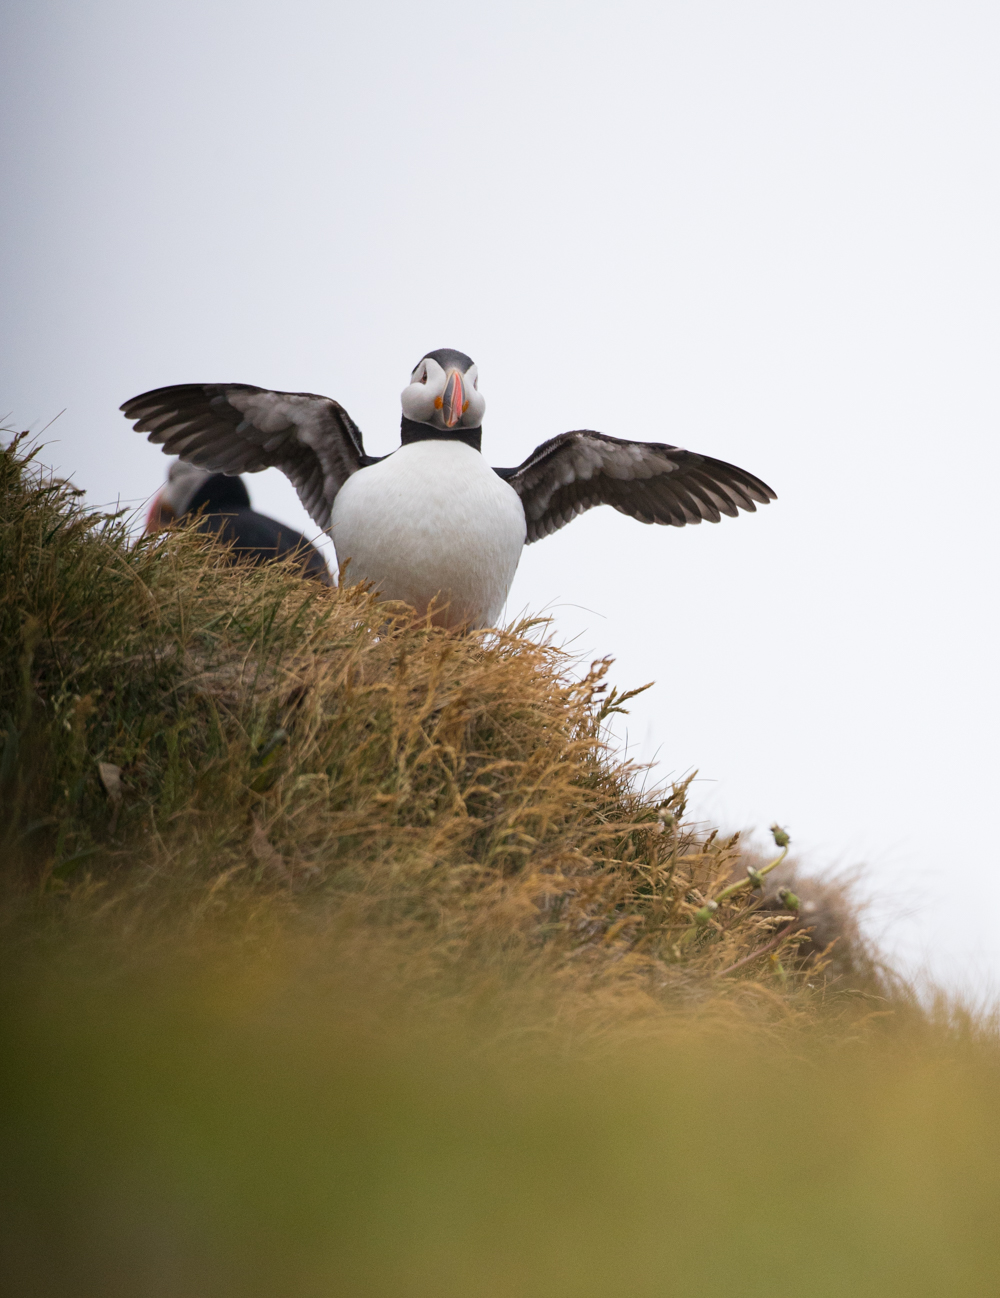 Puffin Watching on Iceland's Southern Coast (Dyrhólaey, Iceland) -- photography by North to South